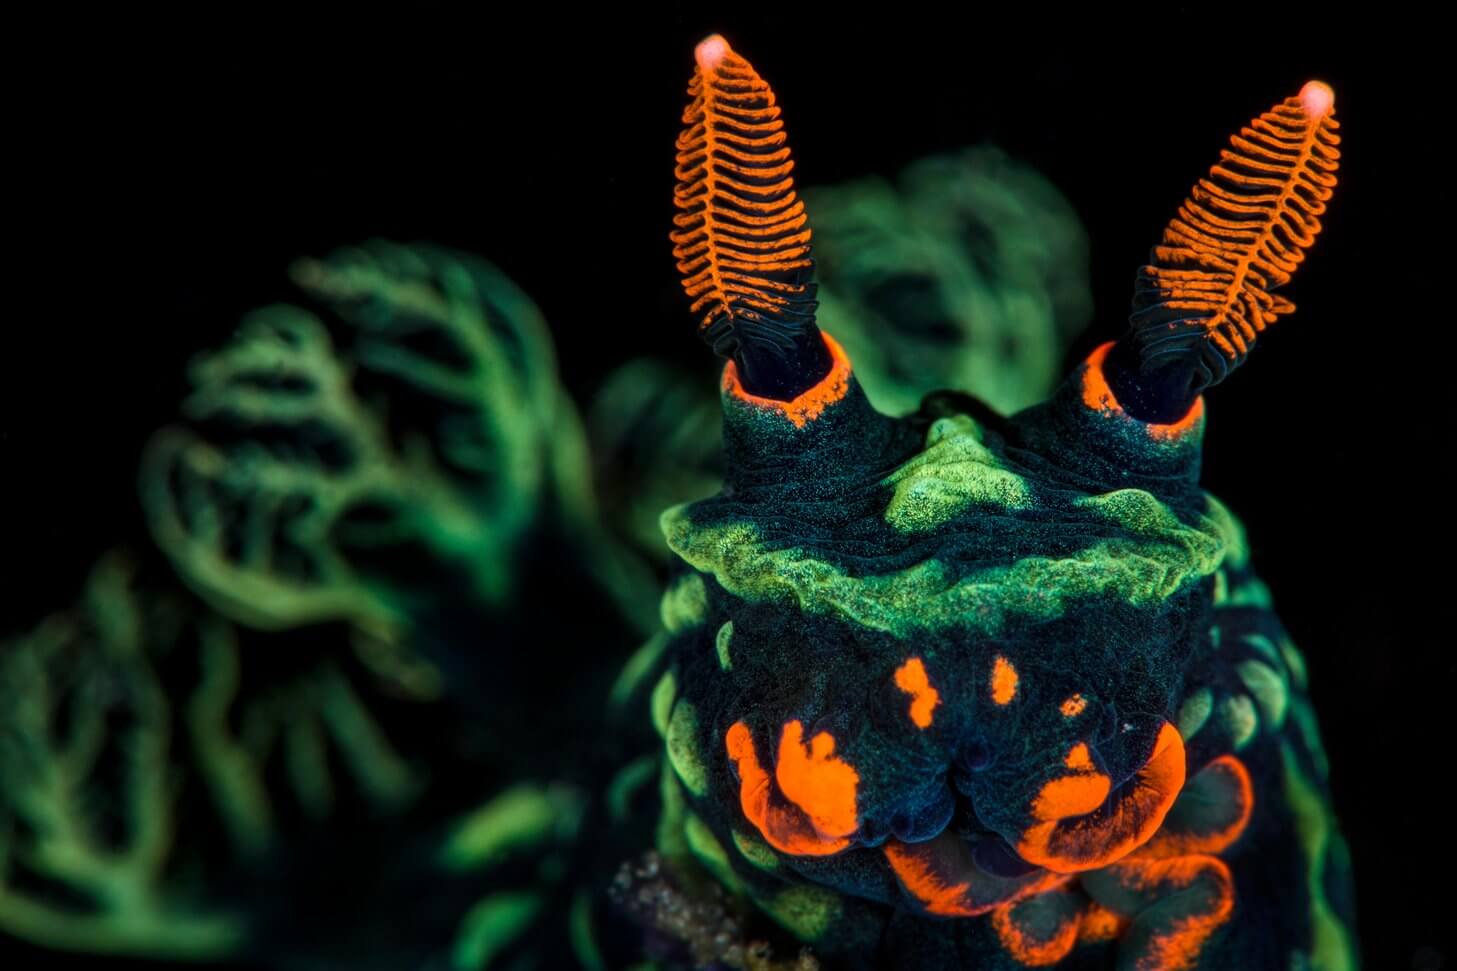 High magnification stock photo of Nudibranch (Nembrotha kubaryana), showing orange mouth parts and sensory rhinophores, and green gills (out of focus) Bitung, North Sulawesi, Indonesia. Lembeh Strait, Molucca Sea. Finalist, Wildlife Photographer of the Year (WP